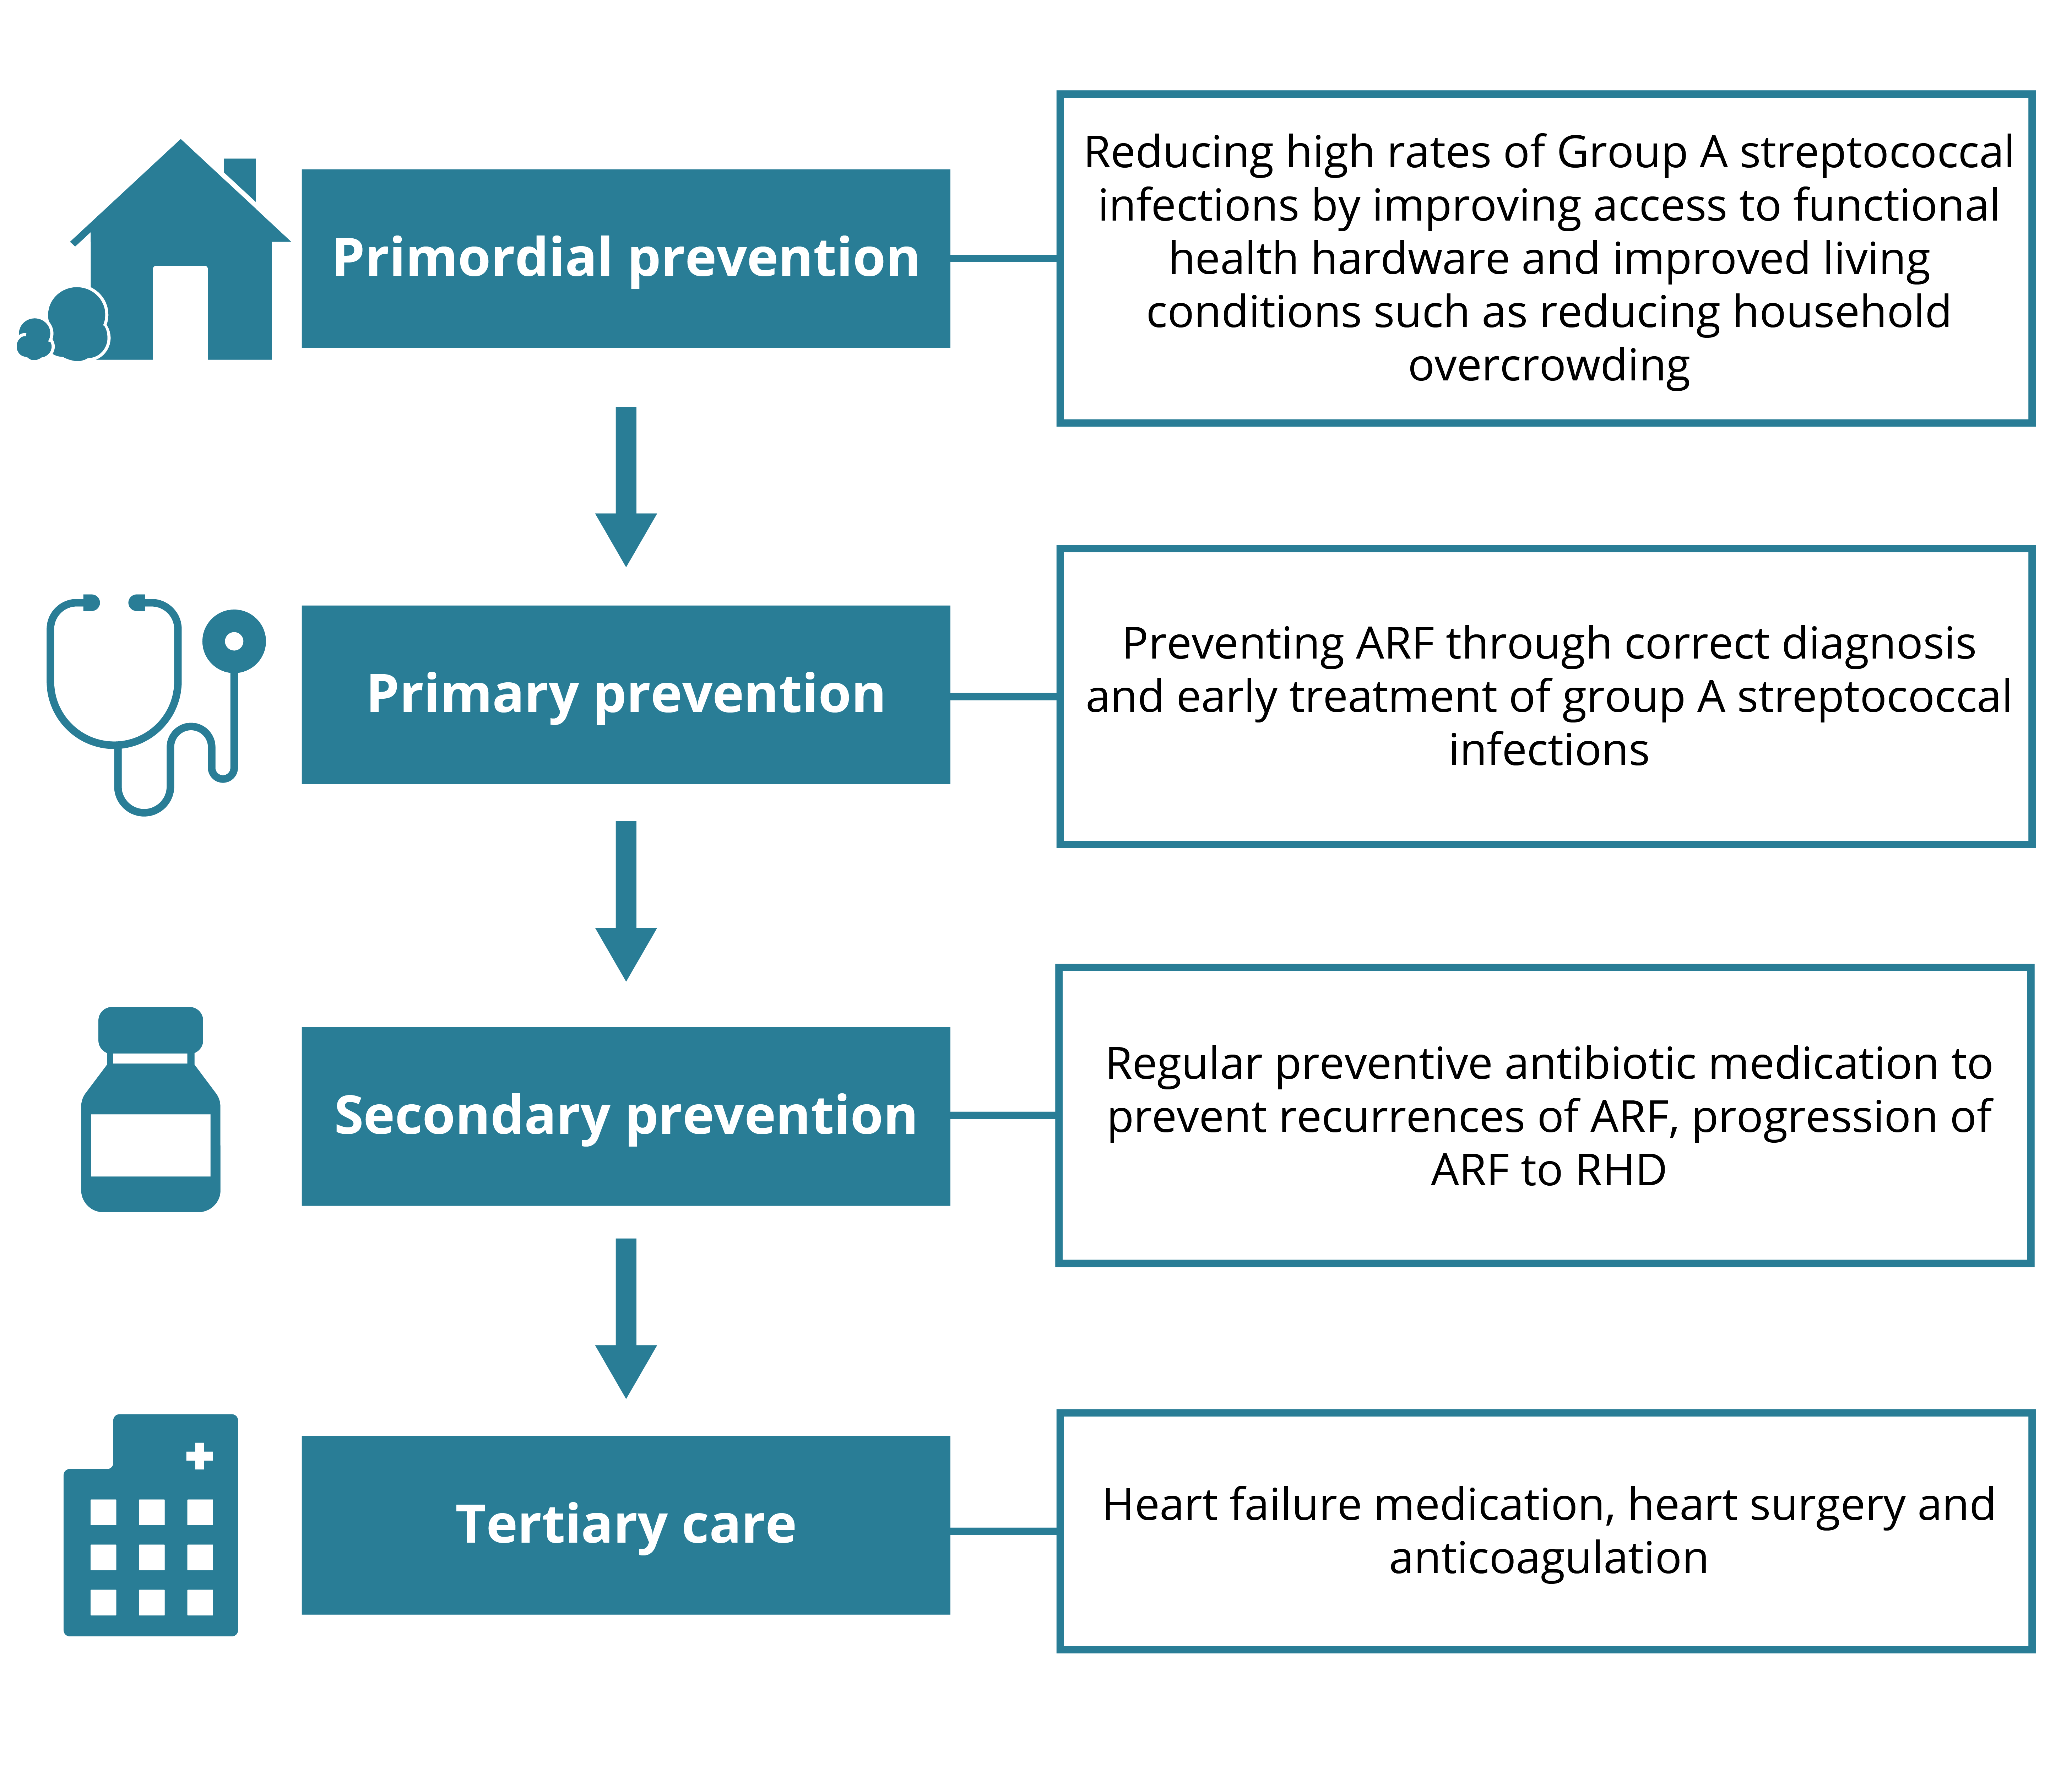 The sequence of prevention, from primordial prevention to tertiary care.